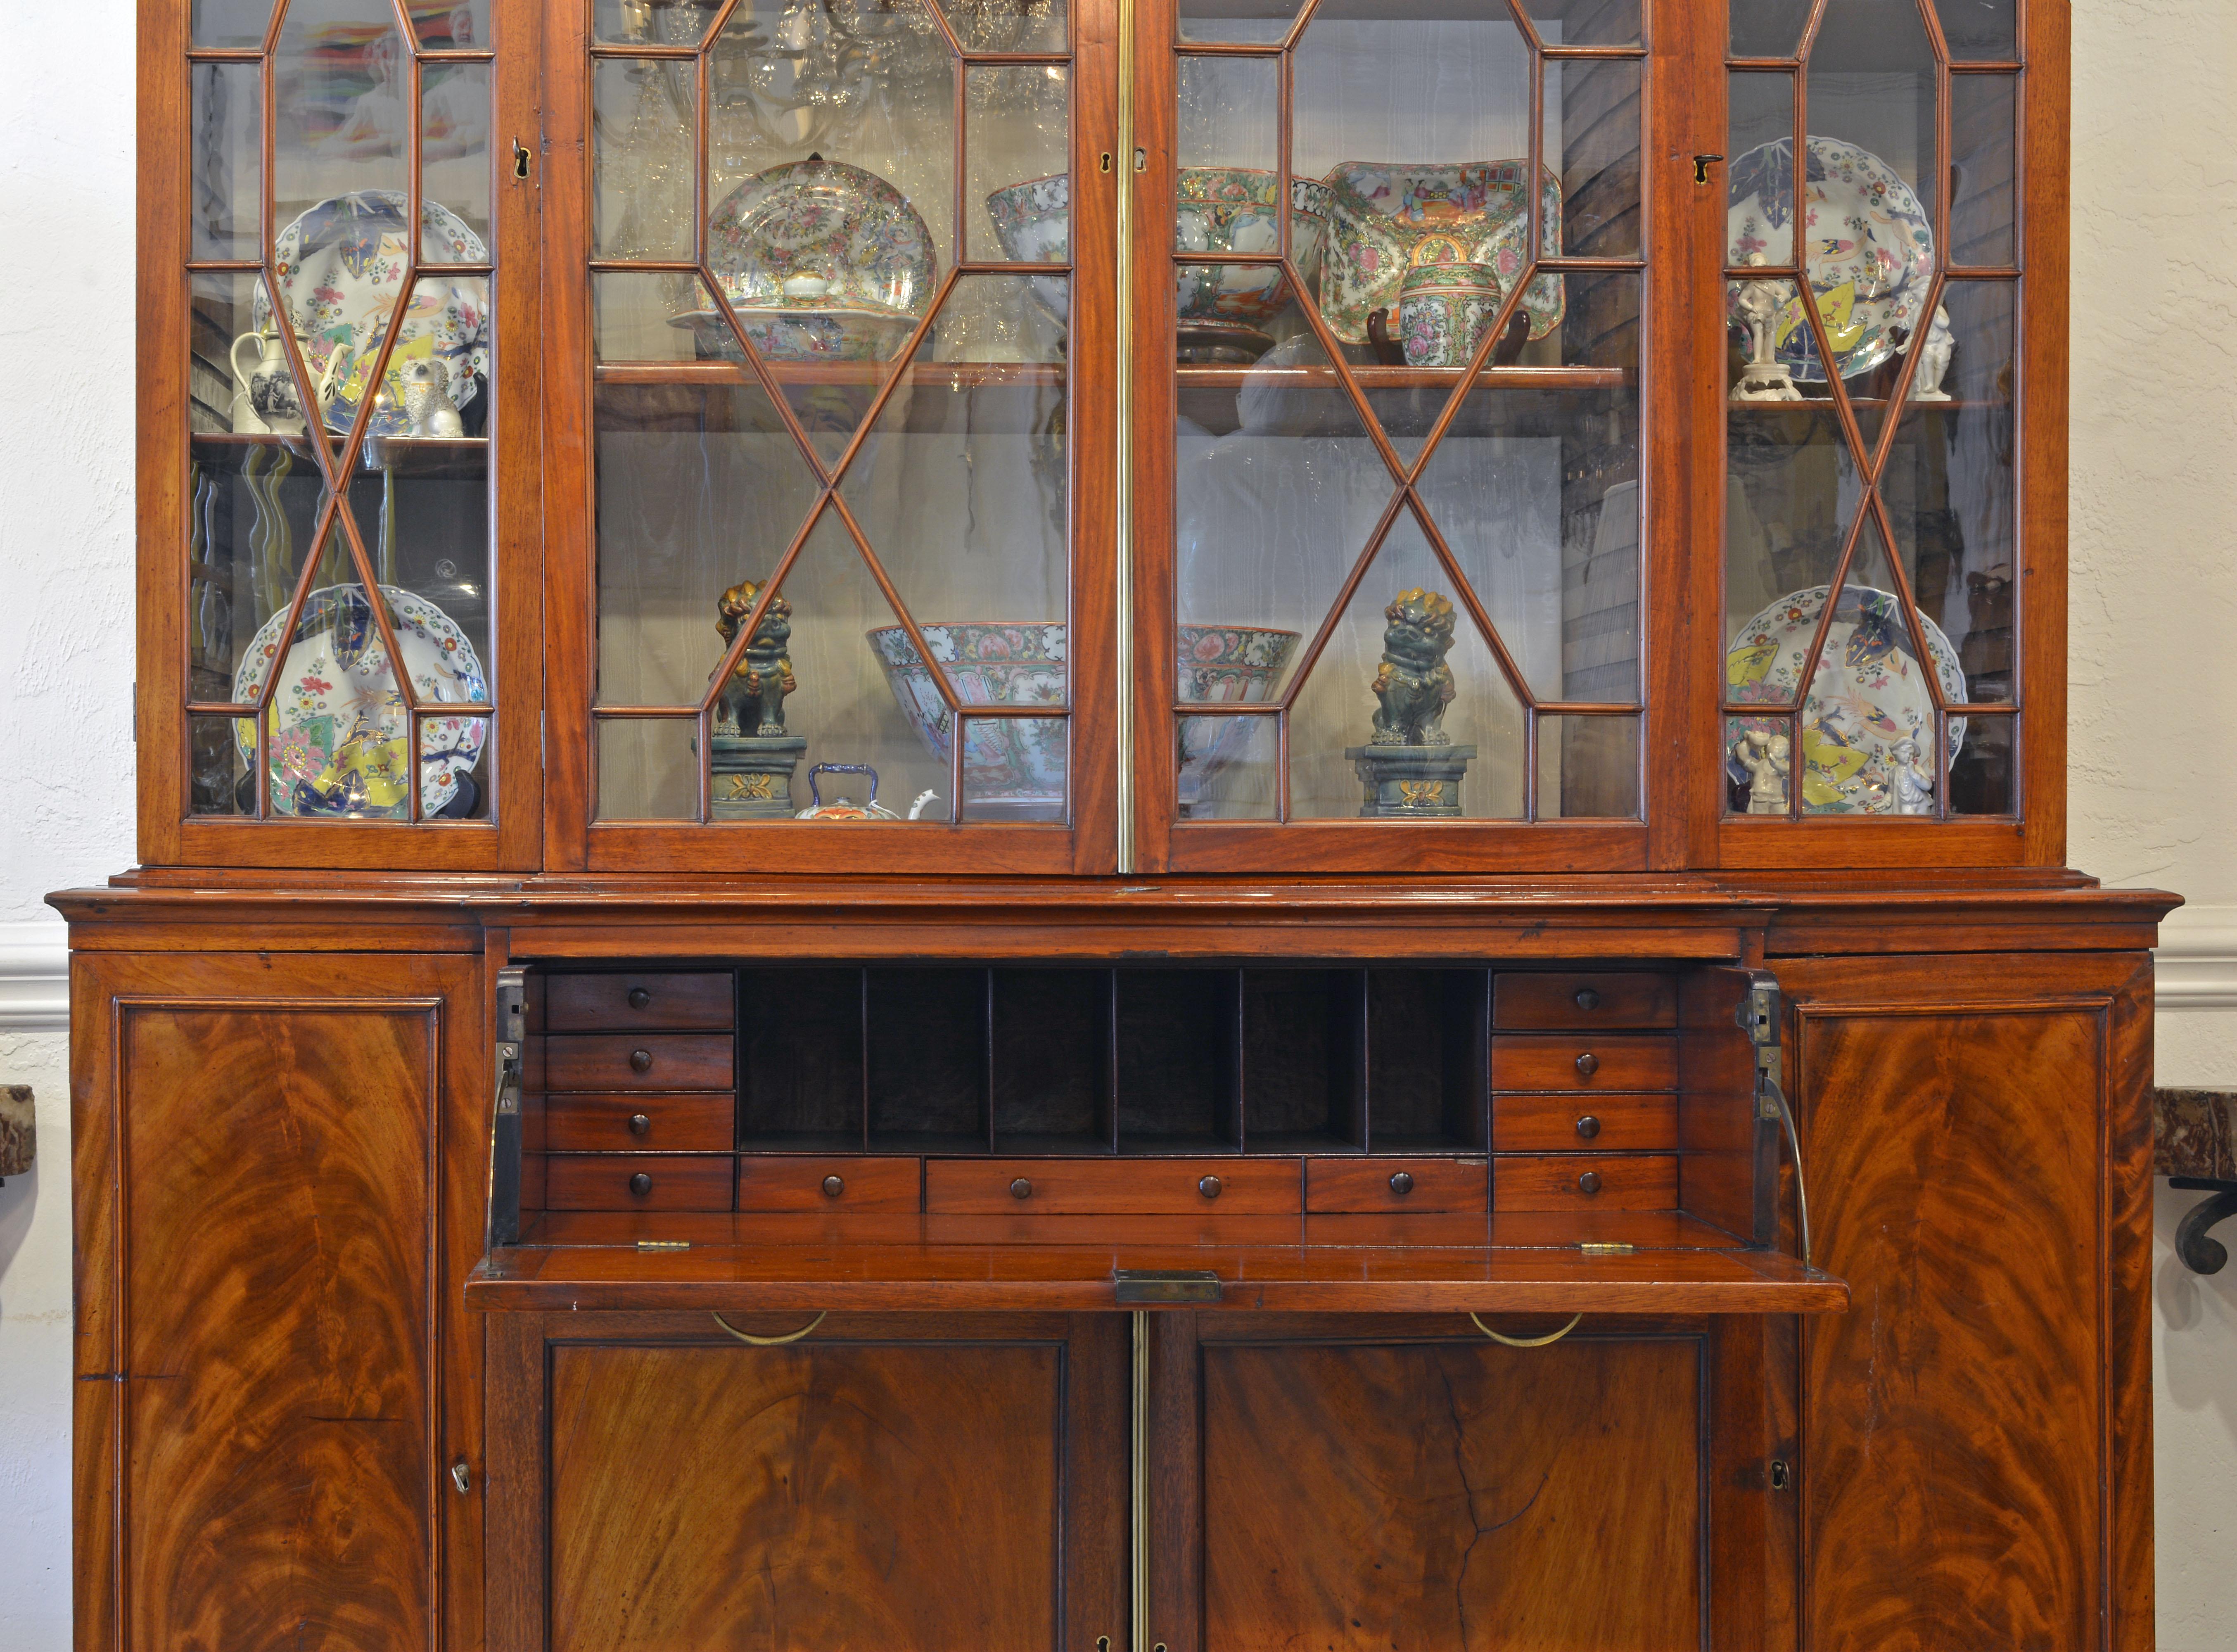 This stately secretary bookcase of great proportions features a central drawer which upon pull out opens up to an interior fitted with smaller drawers and open compartments above a mahogany writing surface. The four glazed doors of the upper section